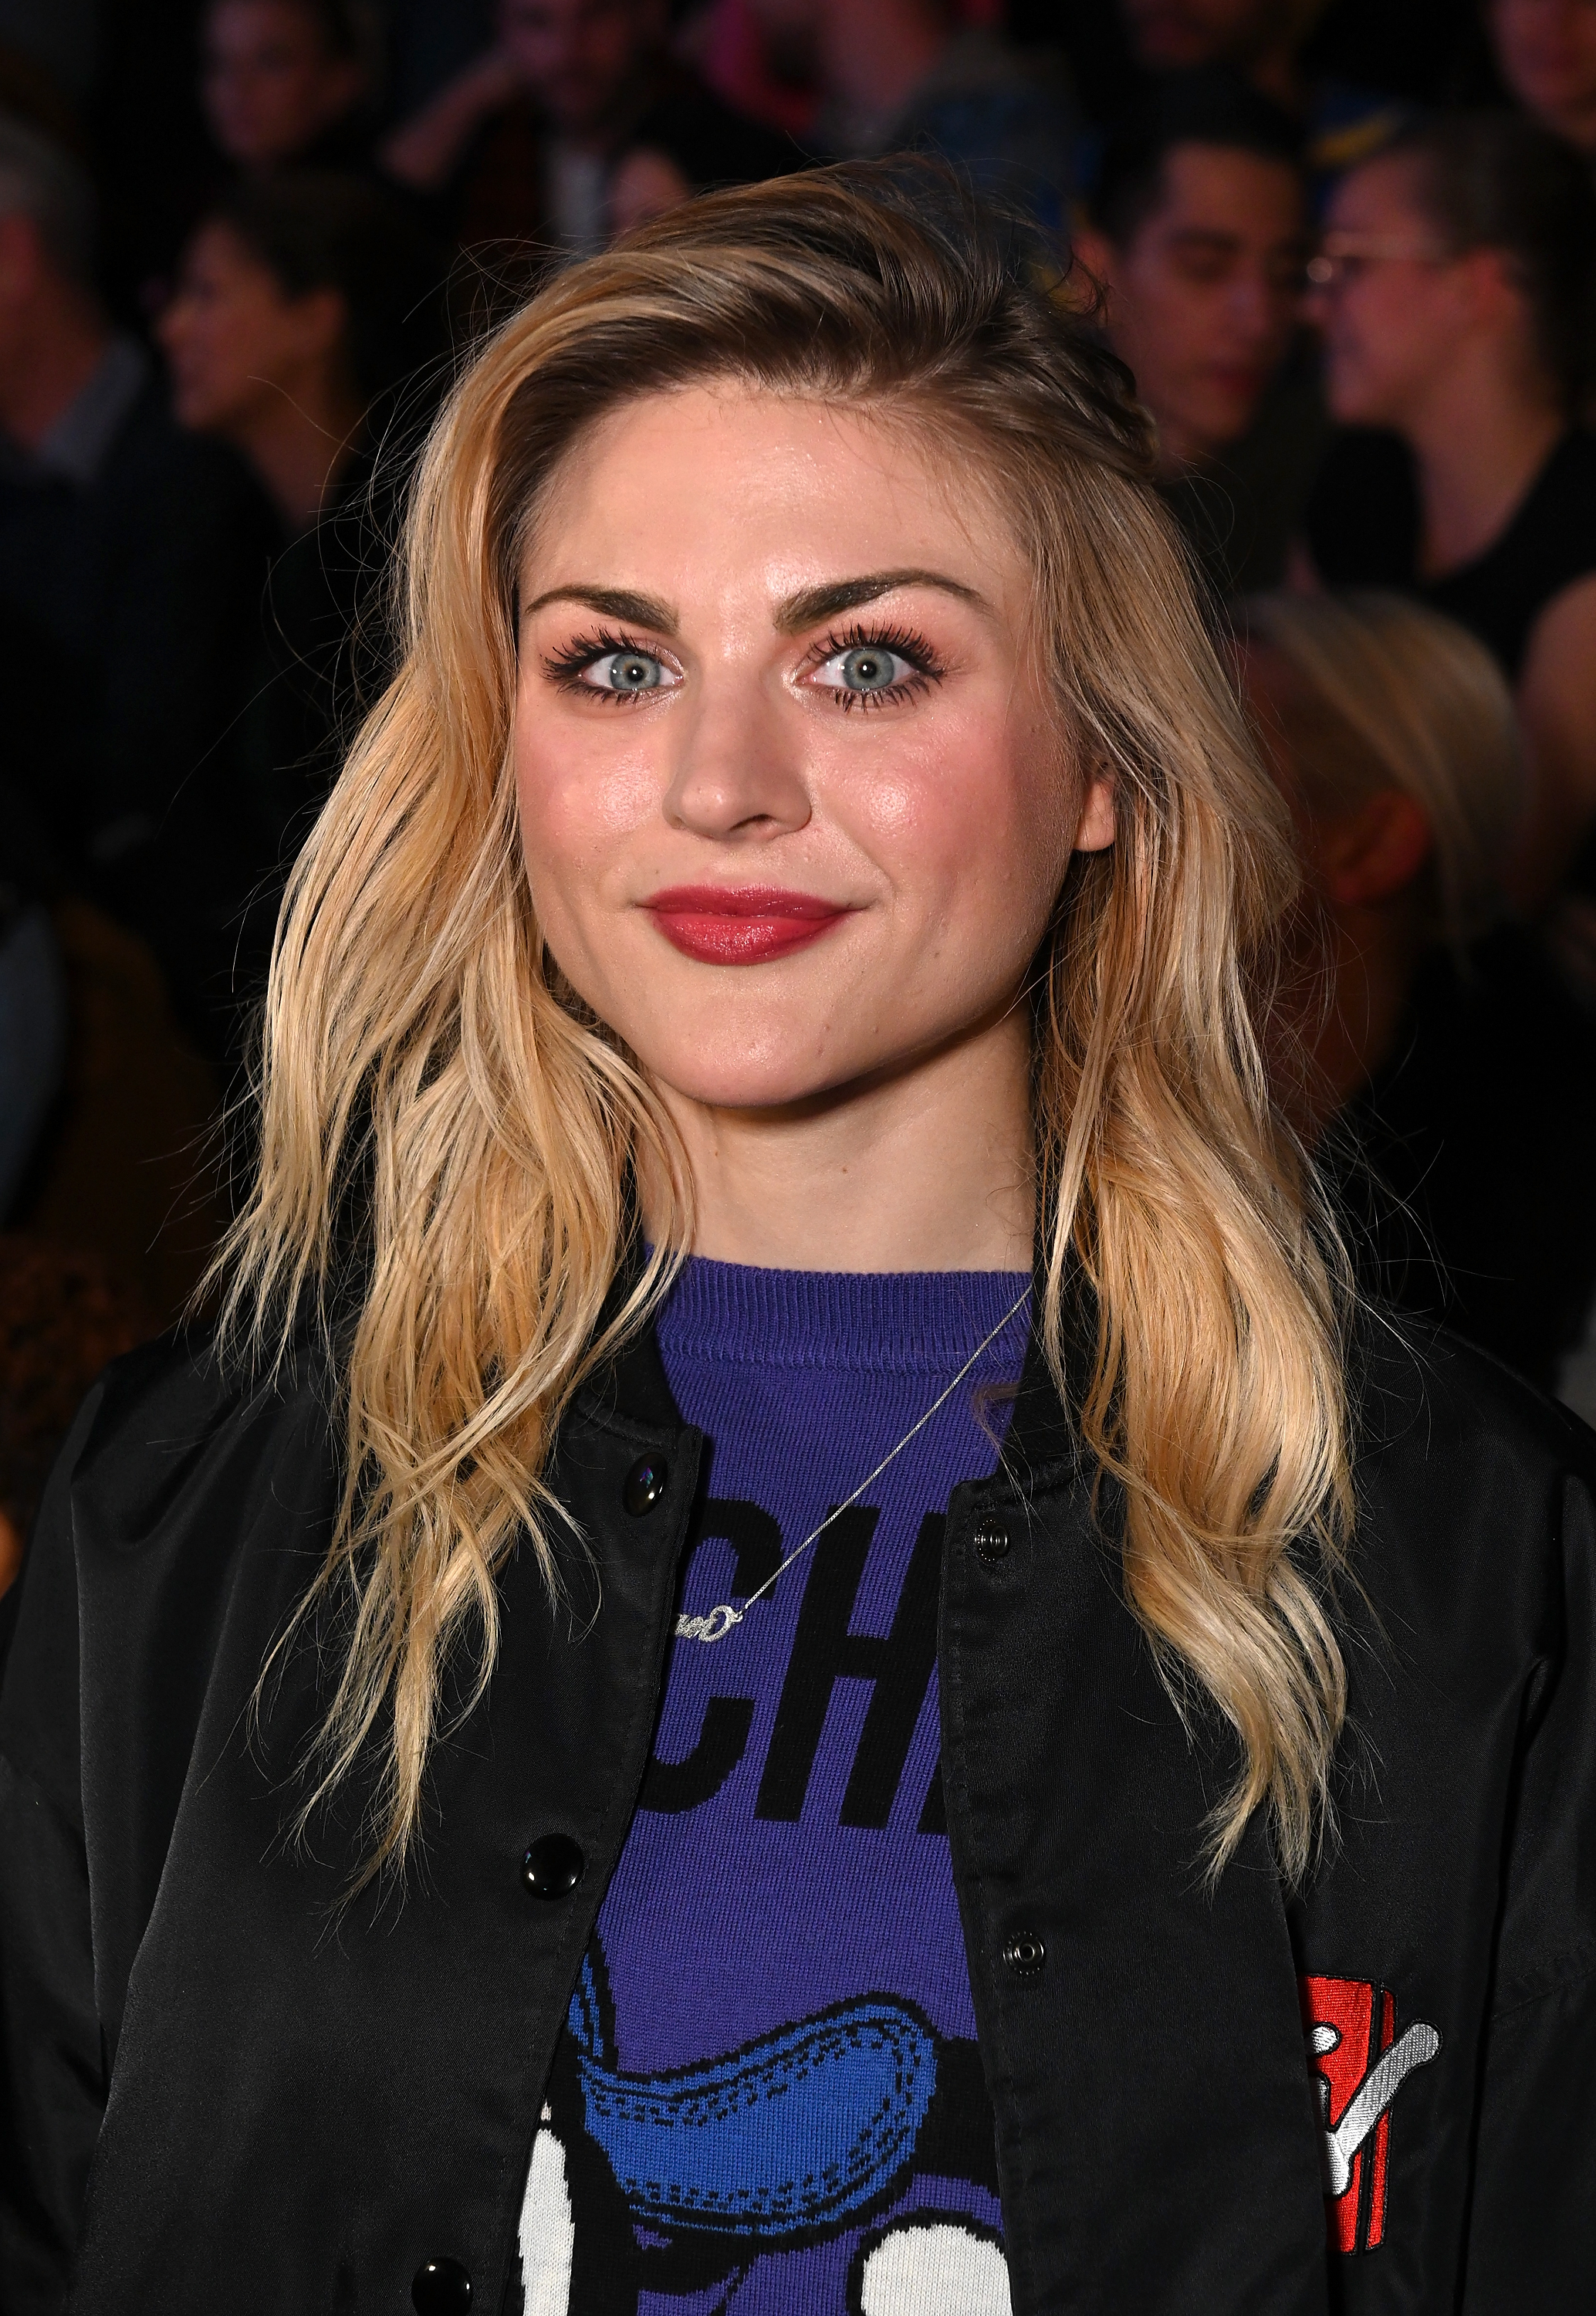 Frances Bean Cobain at the Moschino x H&M fashion show in New York City on October 24, 2018 | Source: Getty Images